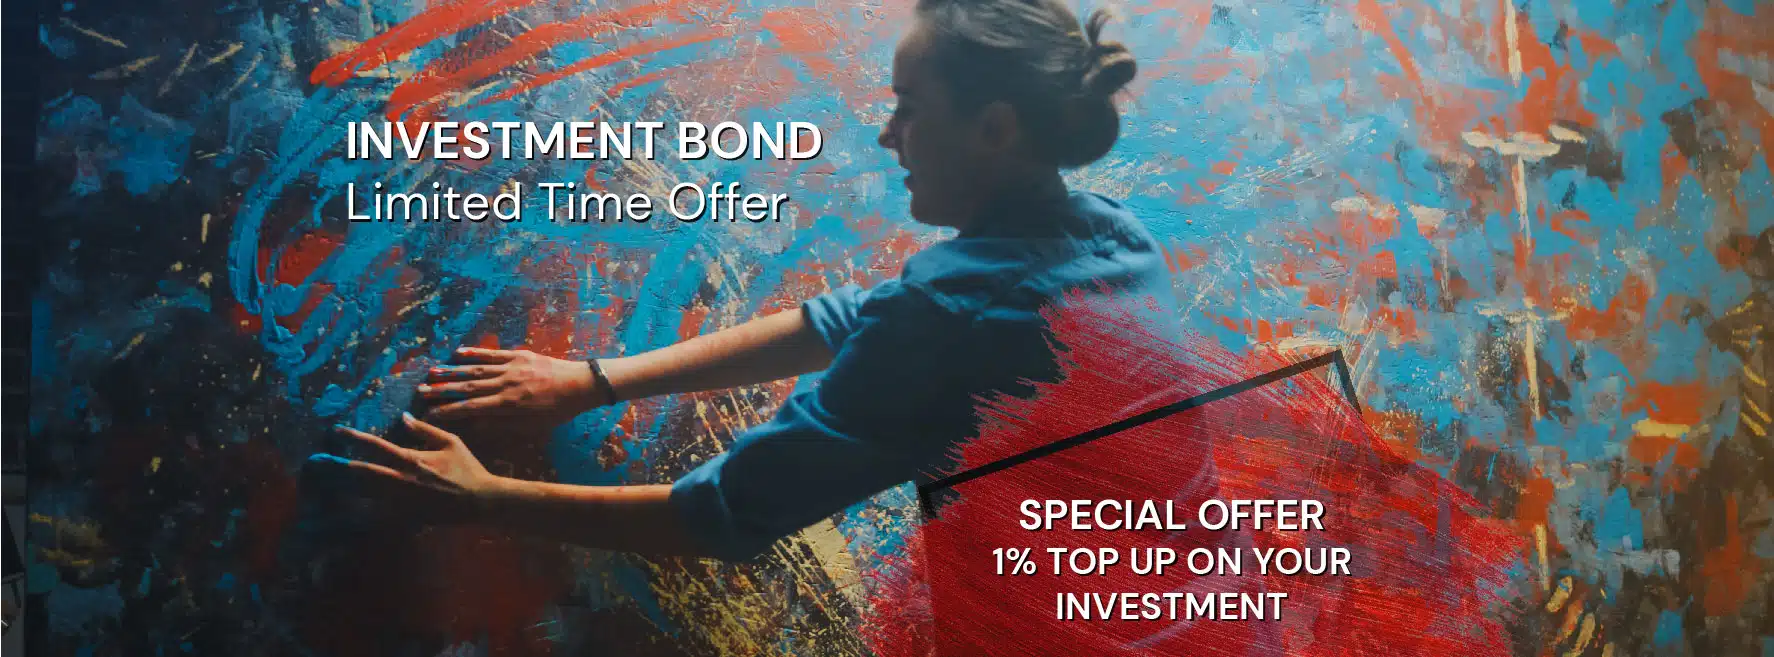 Investment-bond-limited-time-offer